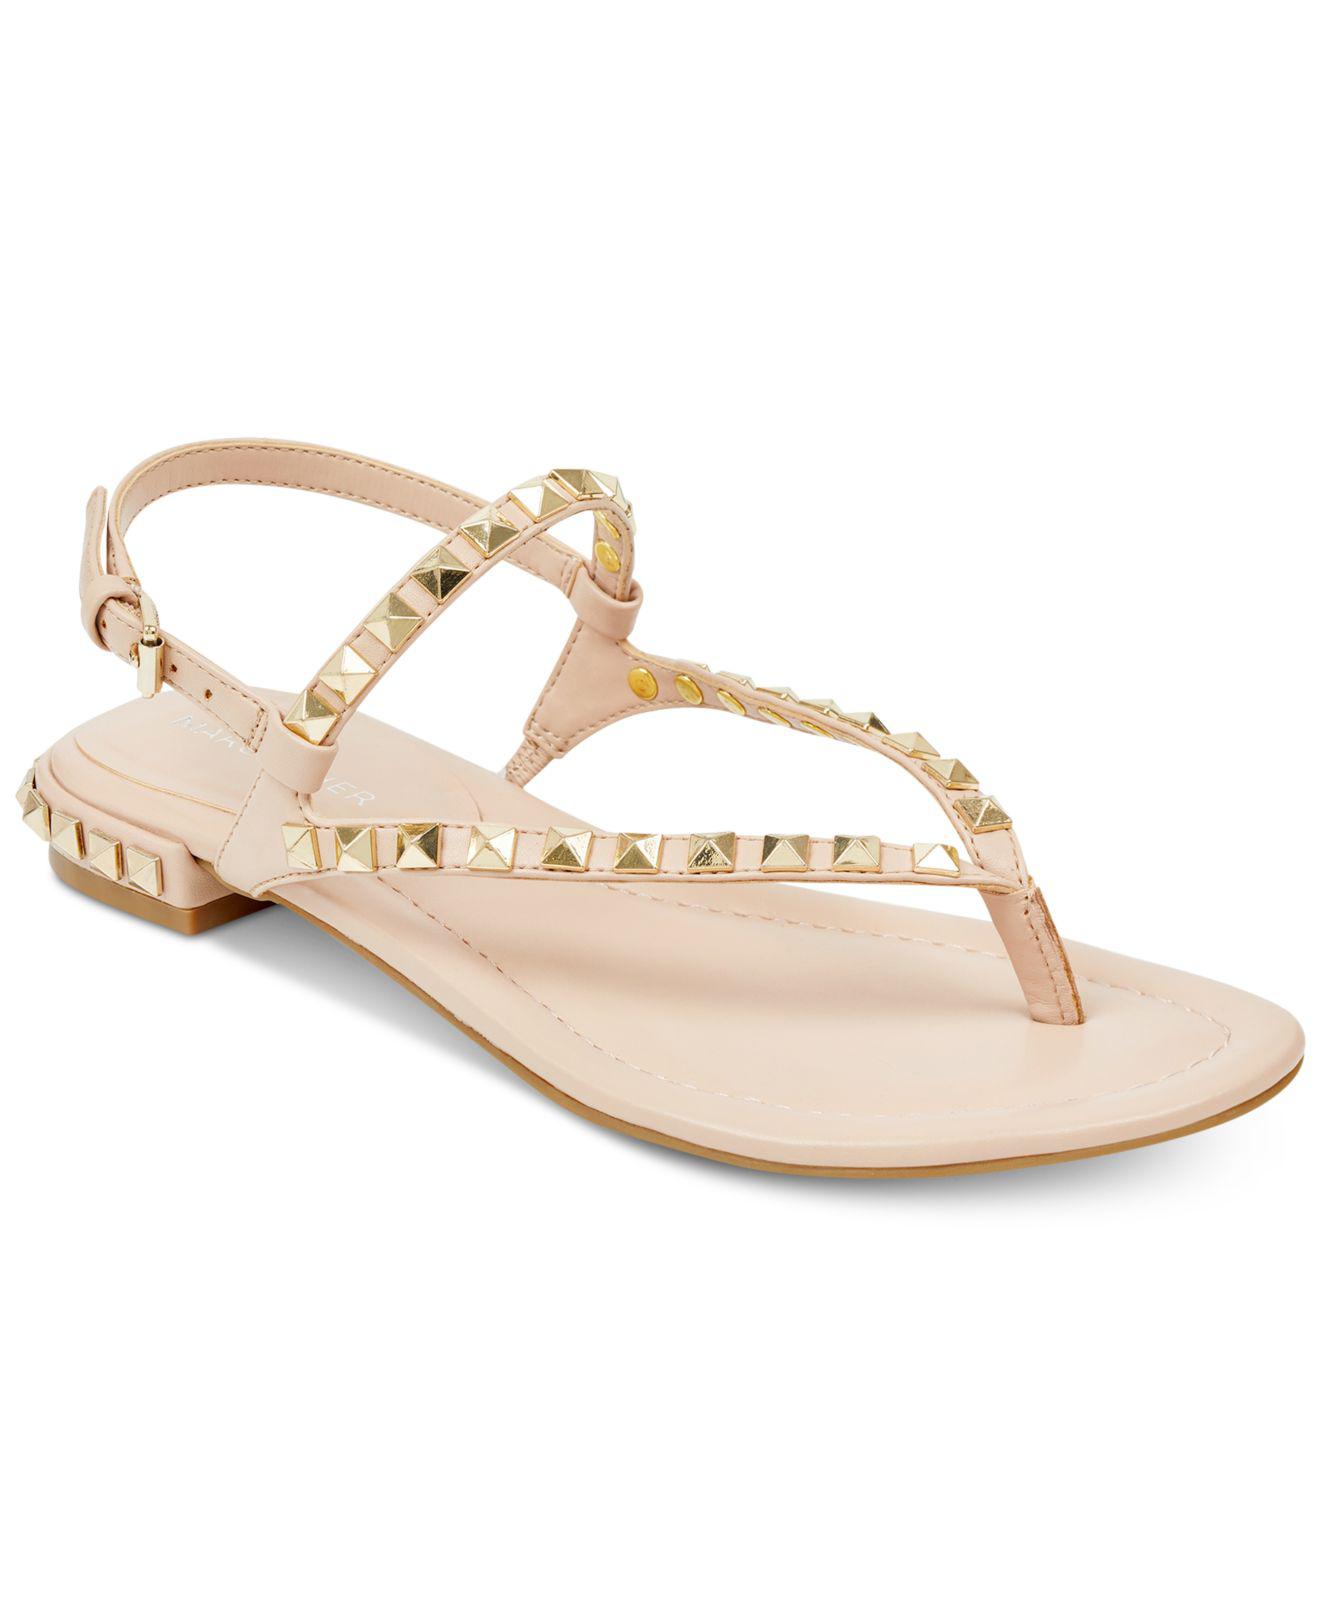 Marc Fisher Pamali Studded Flat Sandals in Natural - Lyst